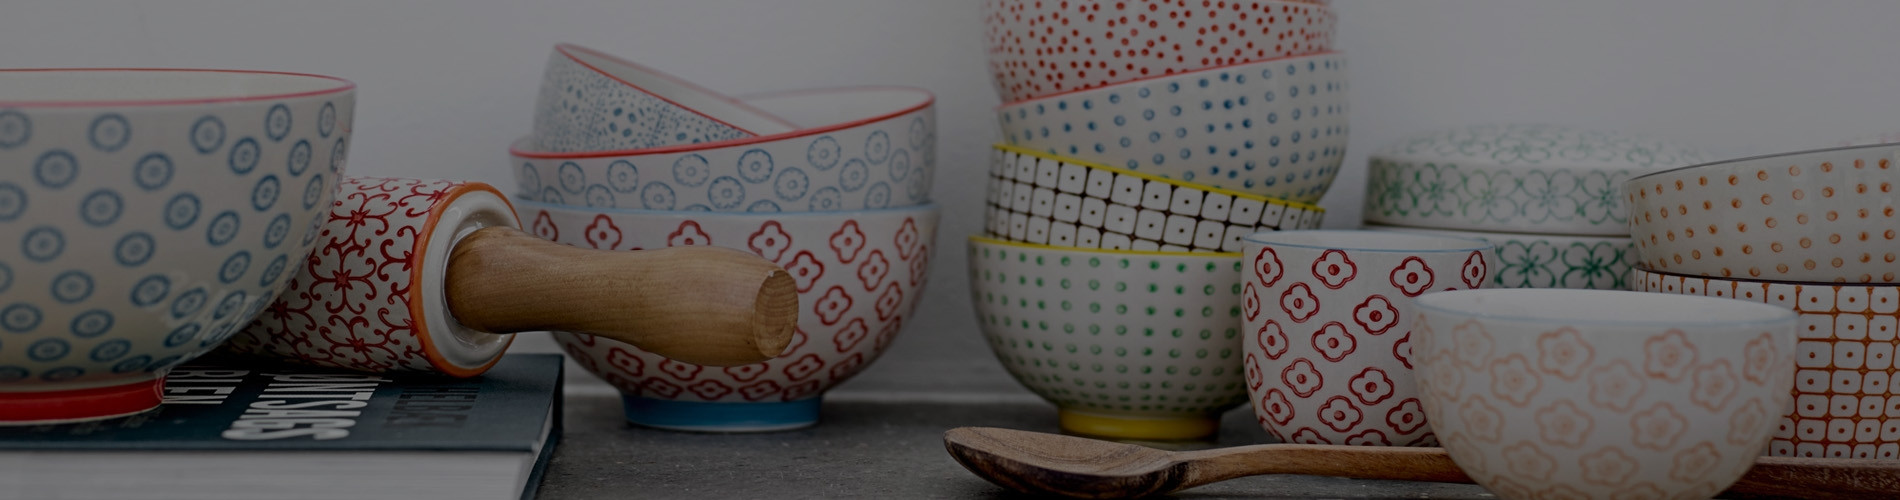 Spruce Up Your Home With Our Tableware Goods | Viva Lagoon